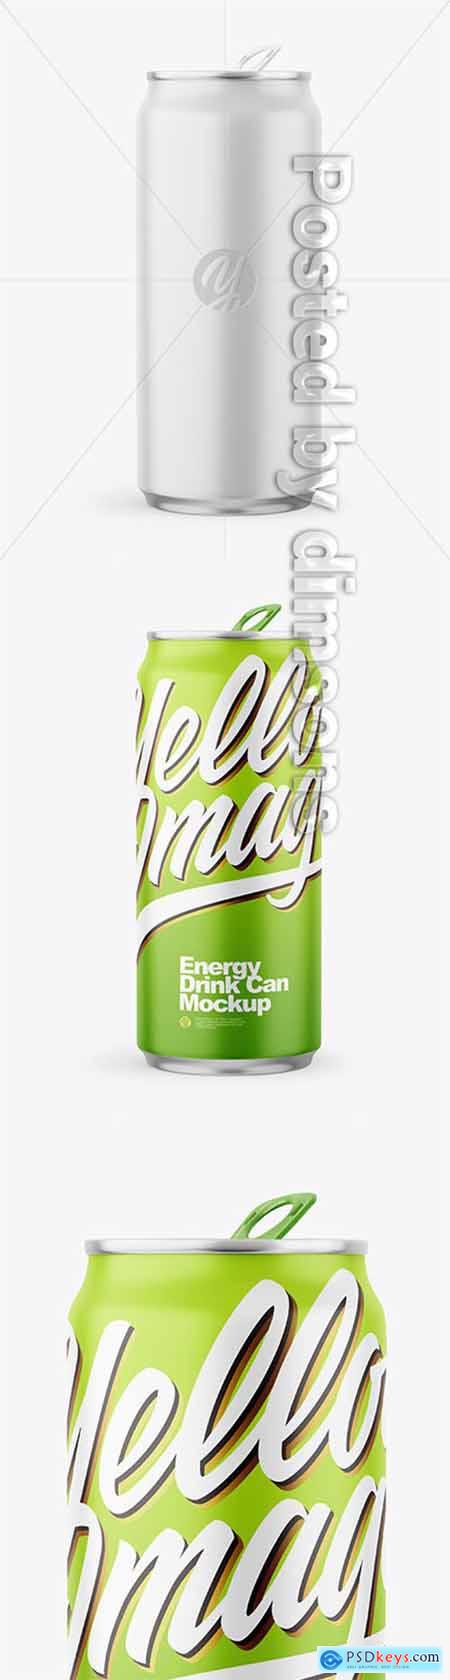 Metallic Drink Can With Matte Finish Mockup 66558